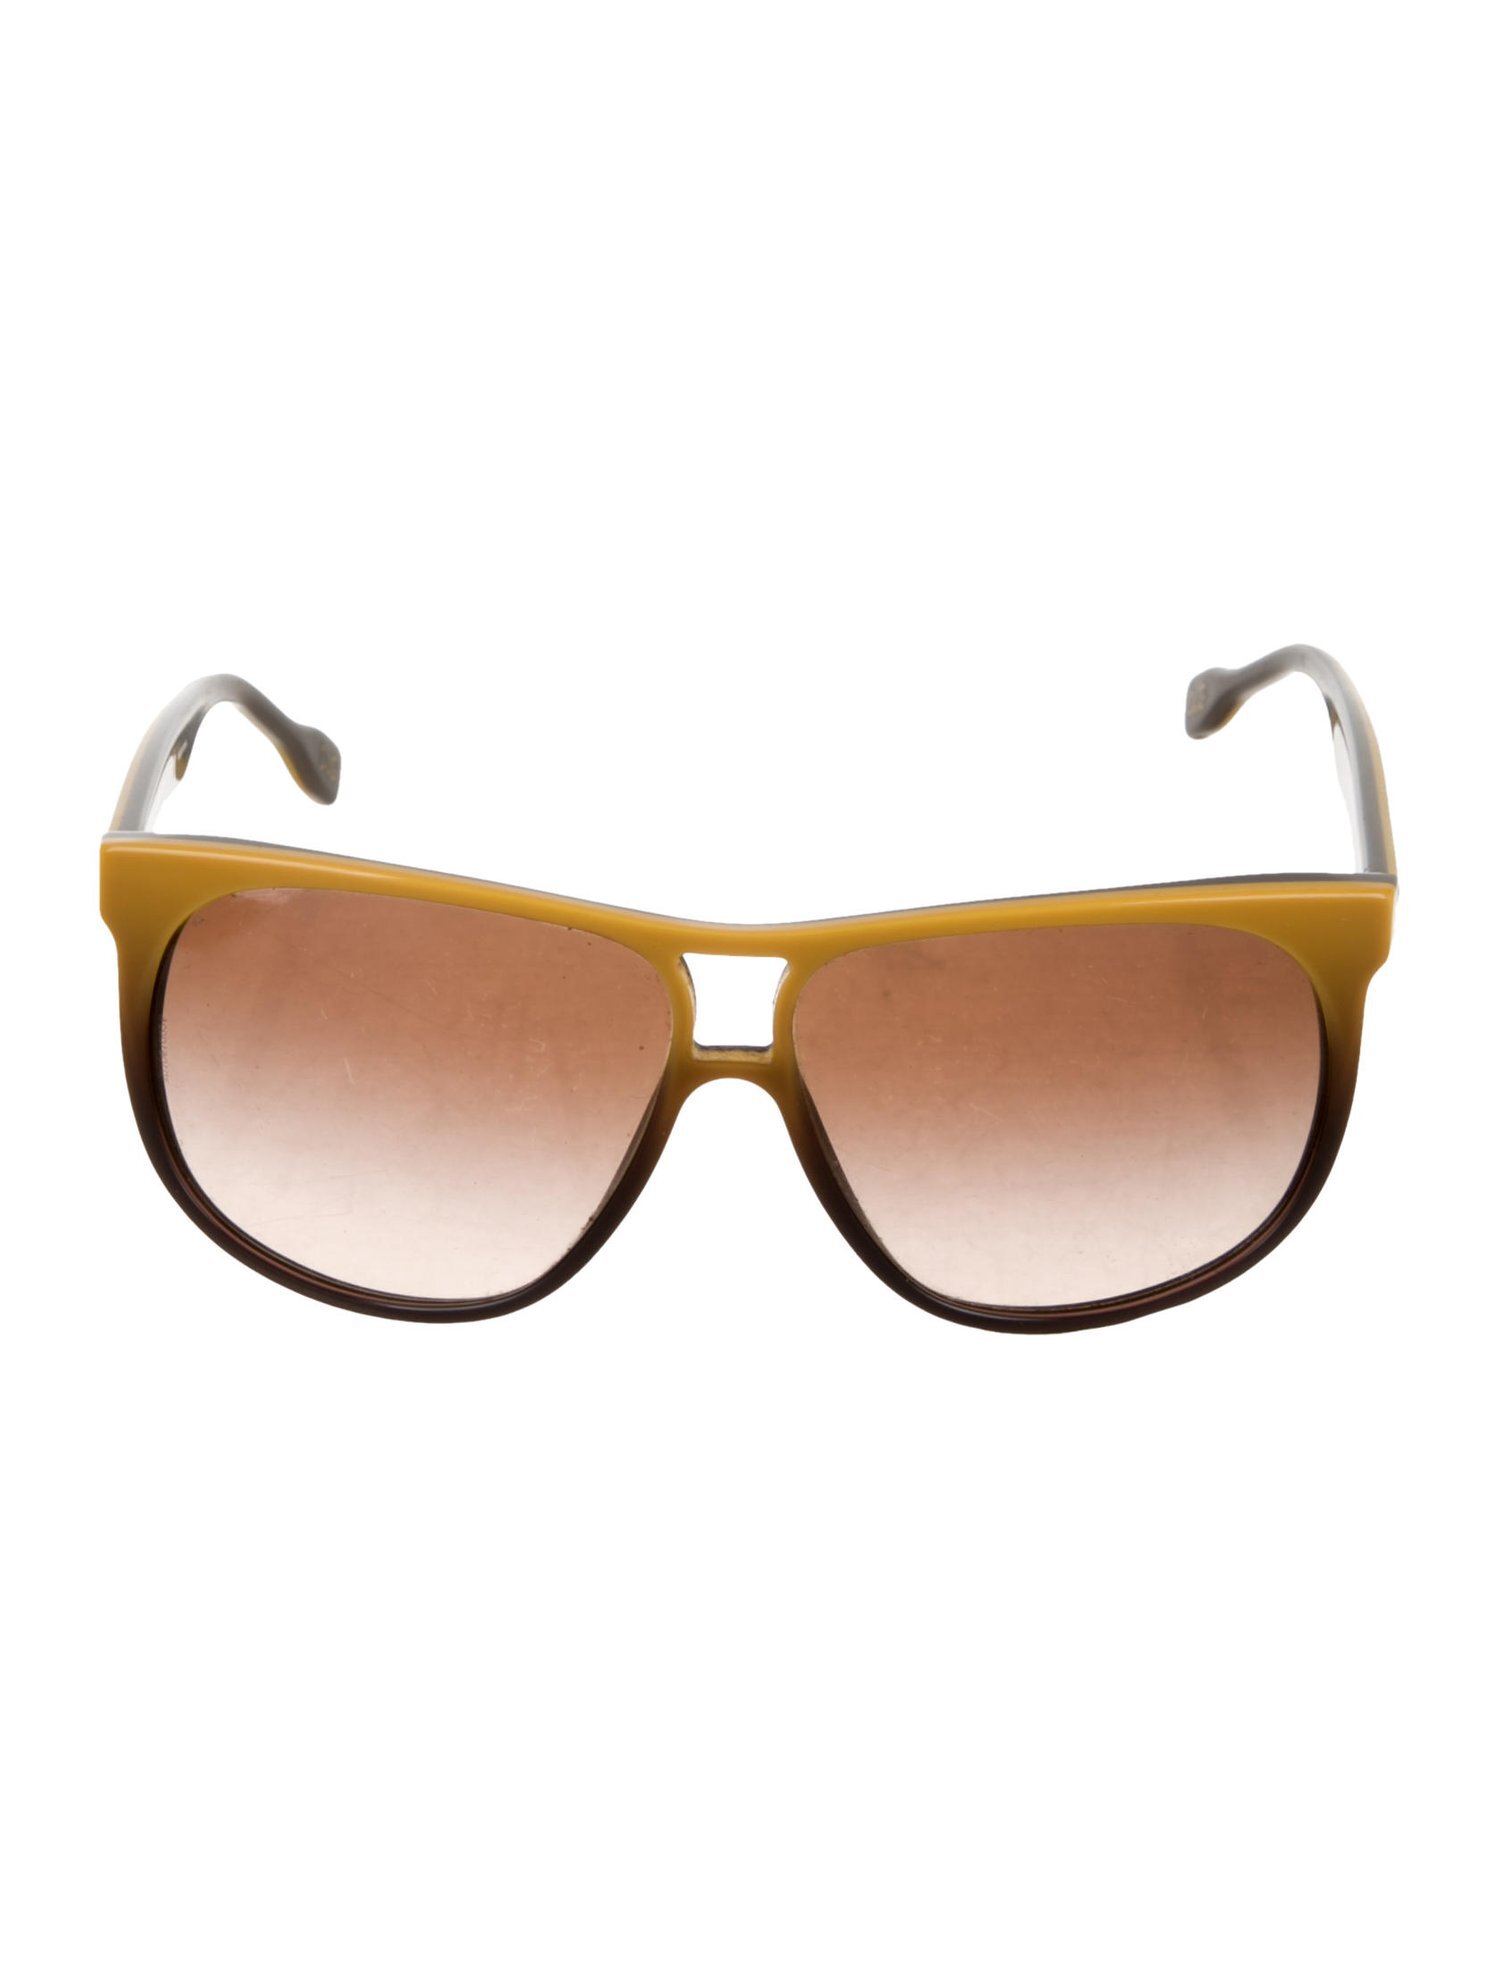 D&G DD3076 Sunglasses in Yellow and Black.jpg